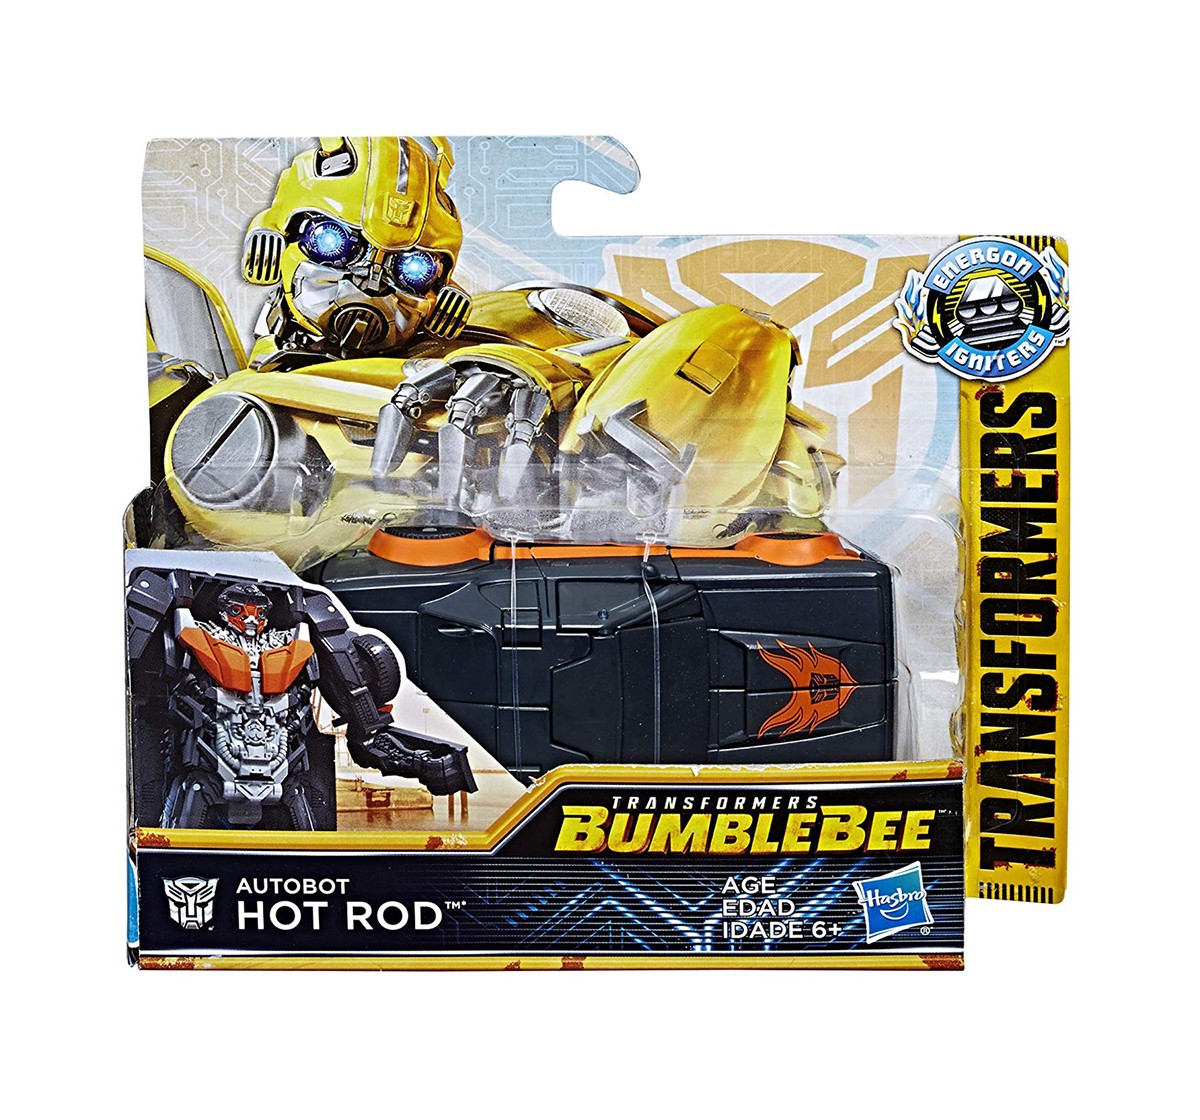 Transformers Bumblebee Energon Igniters Power Series - Autobot Hot Rod, Multi Color Action Figures for Kids age 5Y+ 